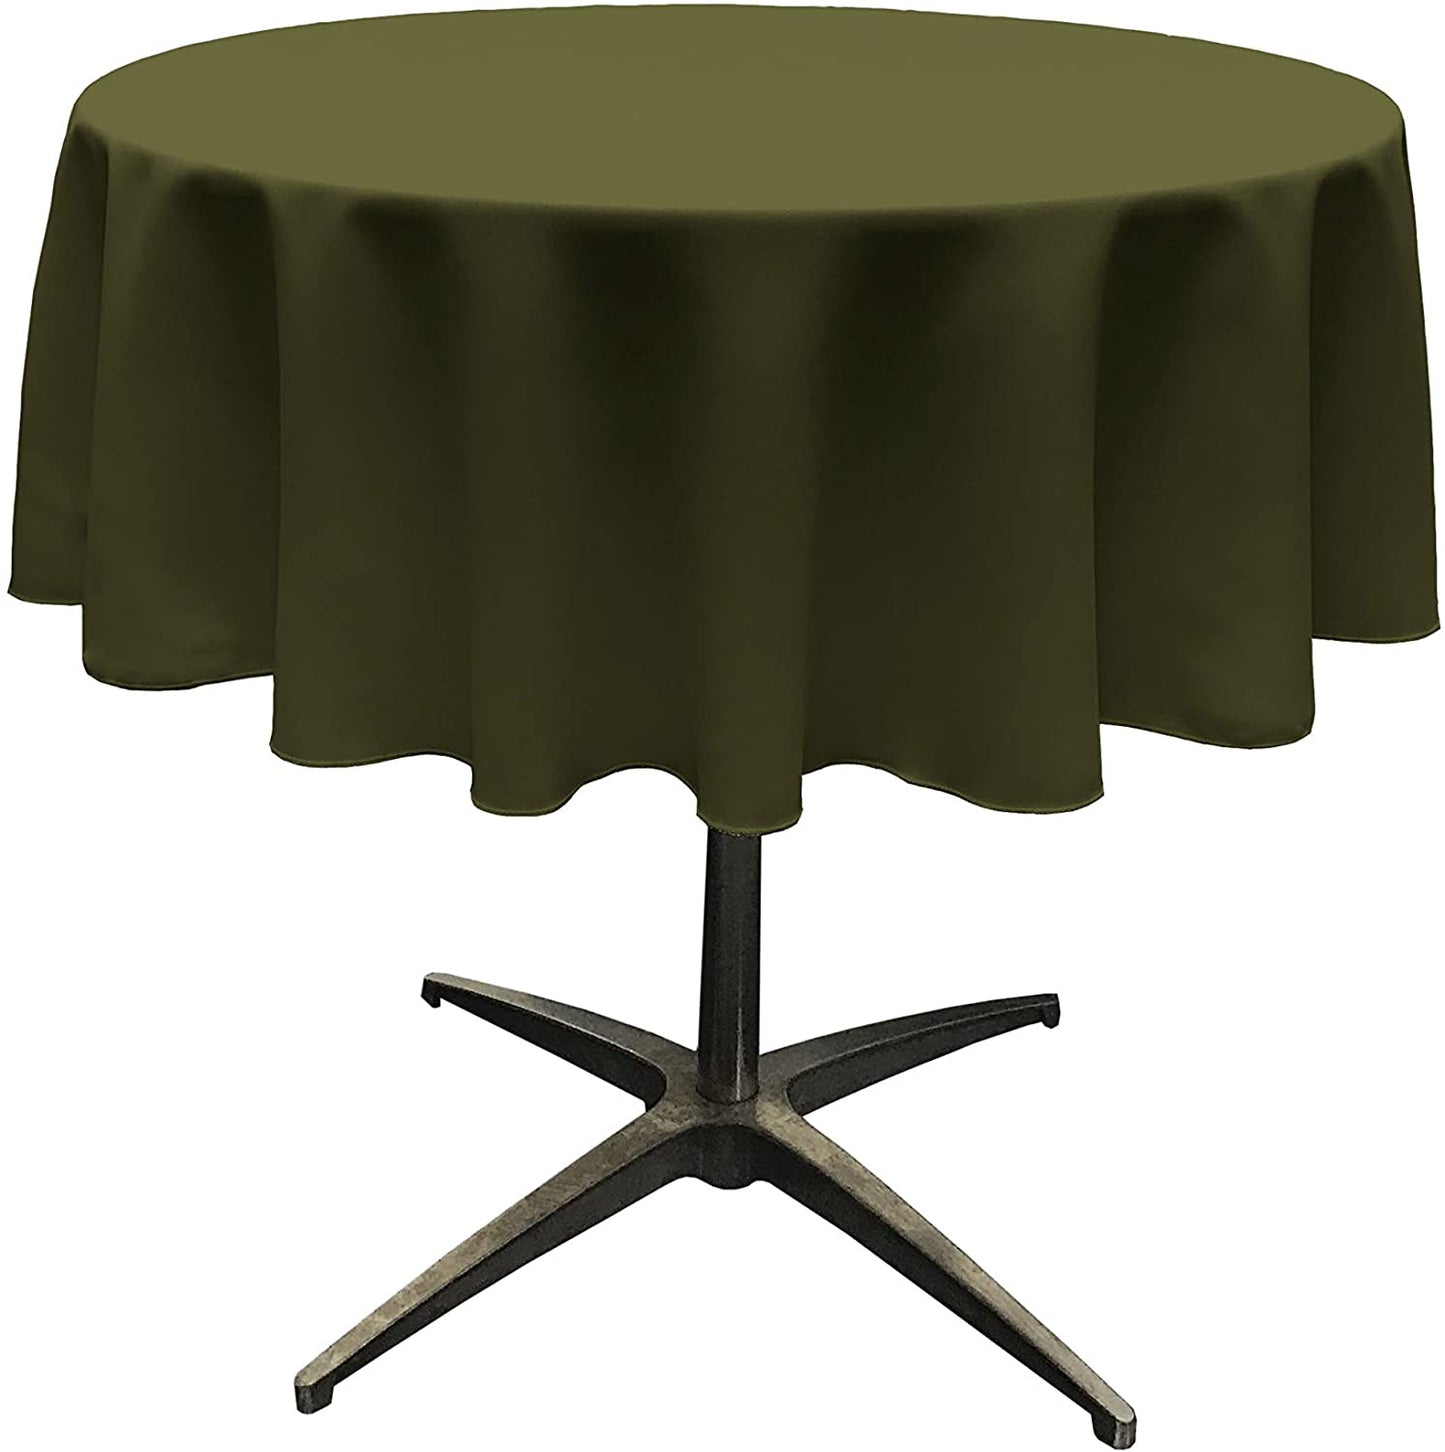 Polyester Poplin Washable Round Tablecloth, Stain and Wrinkle Resistant Table Cover Olive